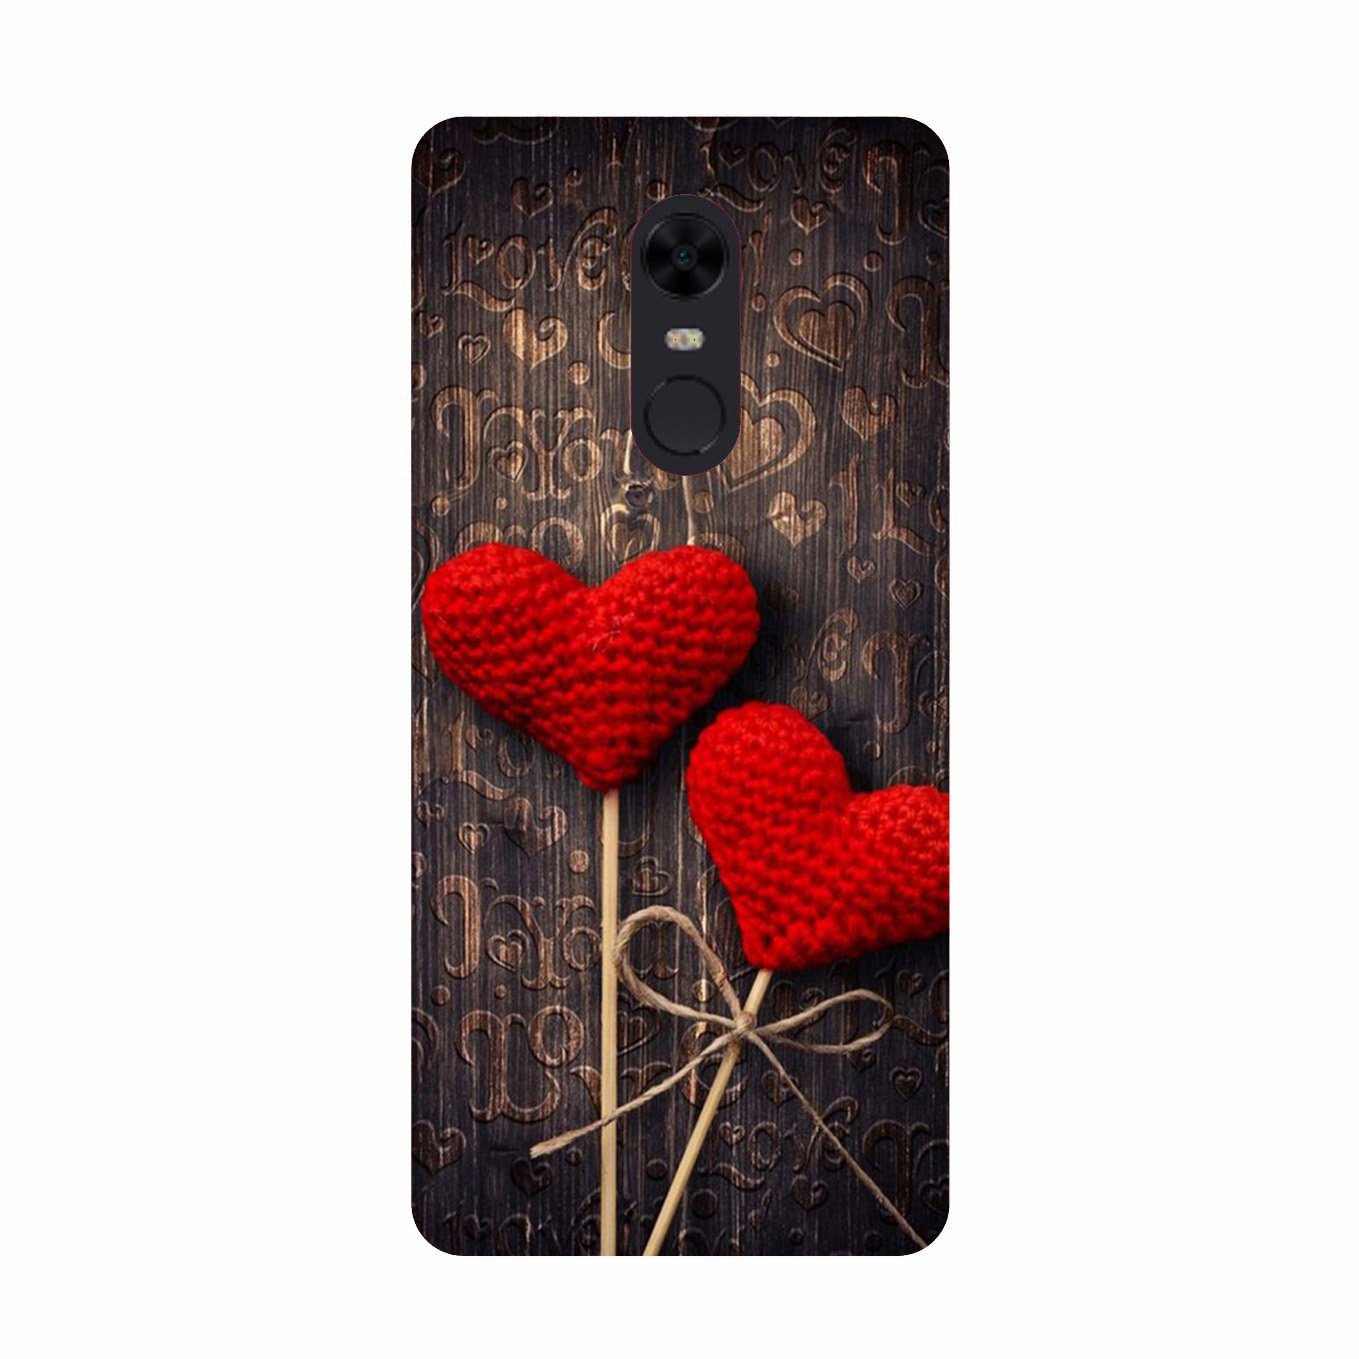 Red Hearts Case for Redmi Note 5